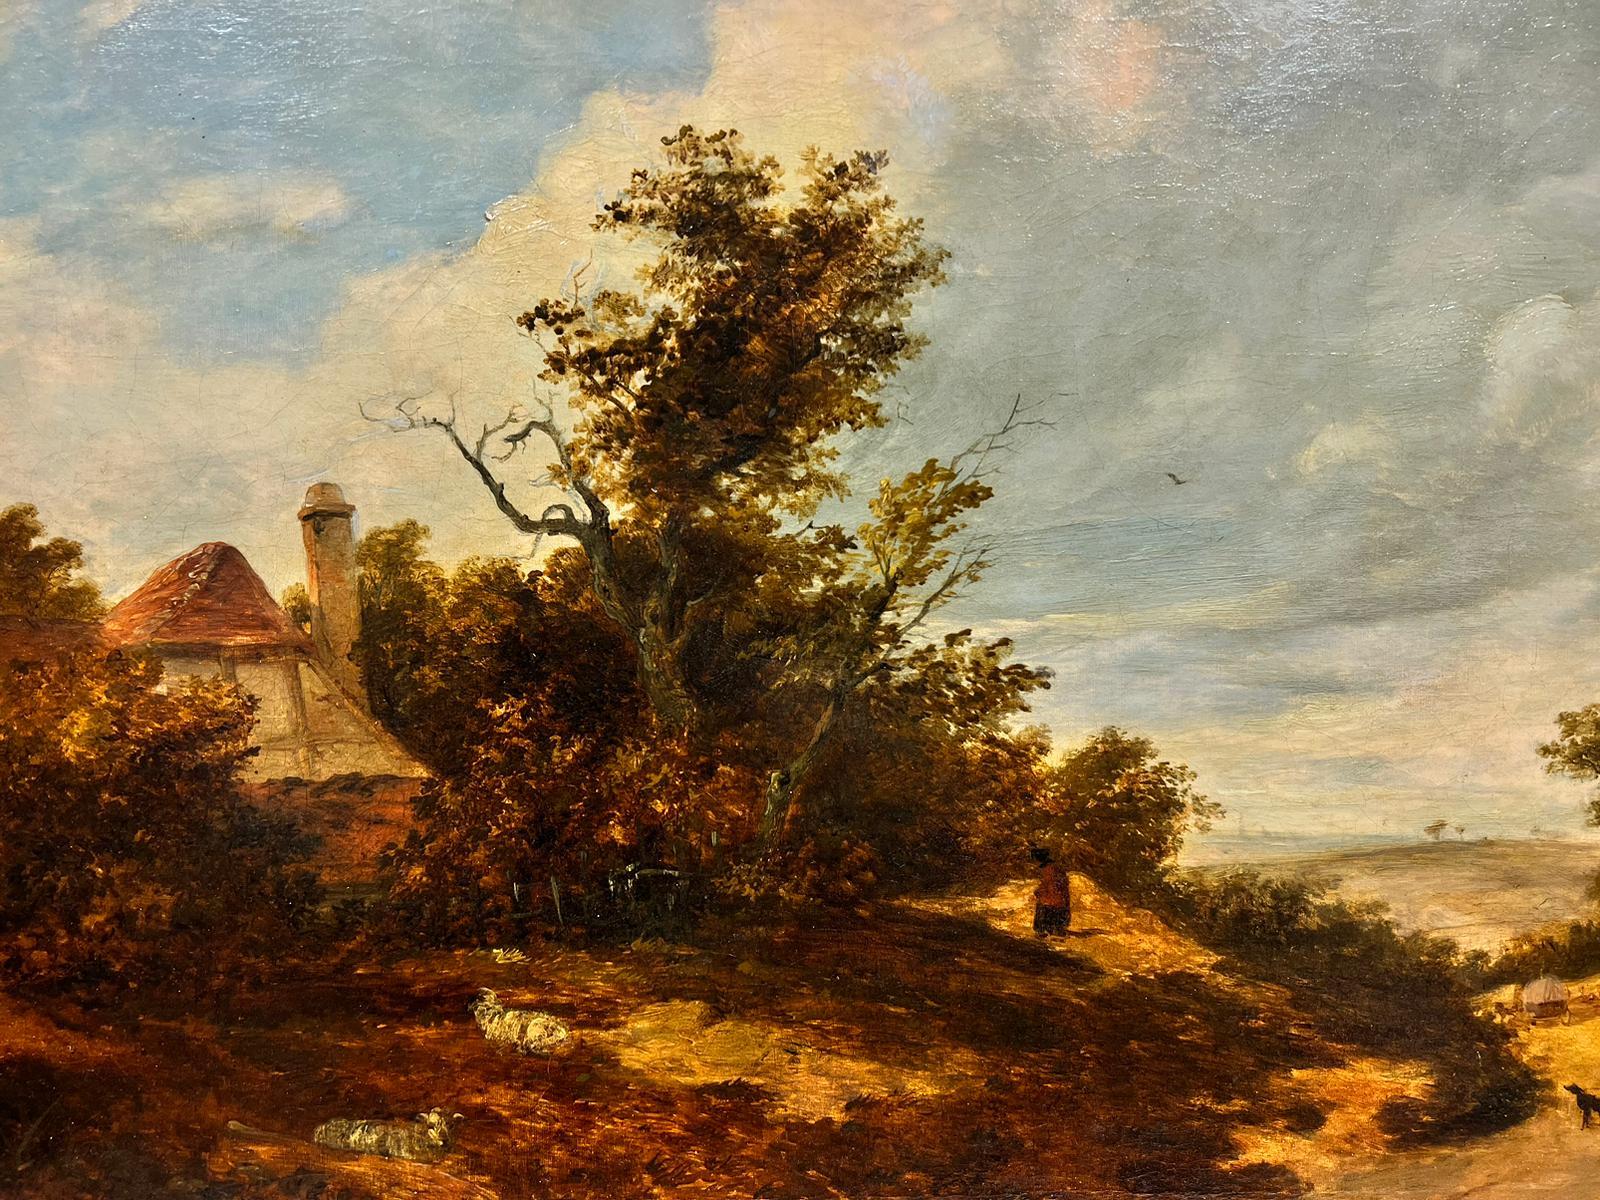 Artist/ School: English School, circa 1830's, follower of John Constable

Title: The Rural Lane

Medium: oil on canvas, framed

Framed: 22 x 28 inches
Painting: 18 x 24 inches

Provenance: private collection, England

Condition: The painting is in